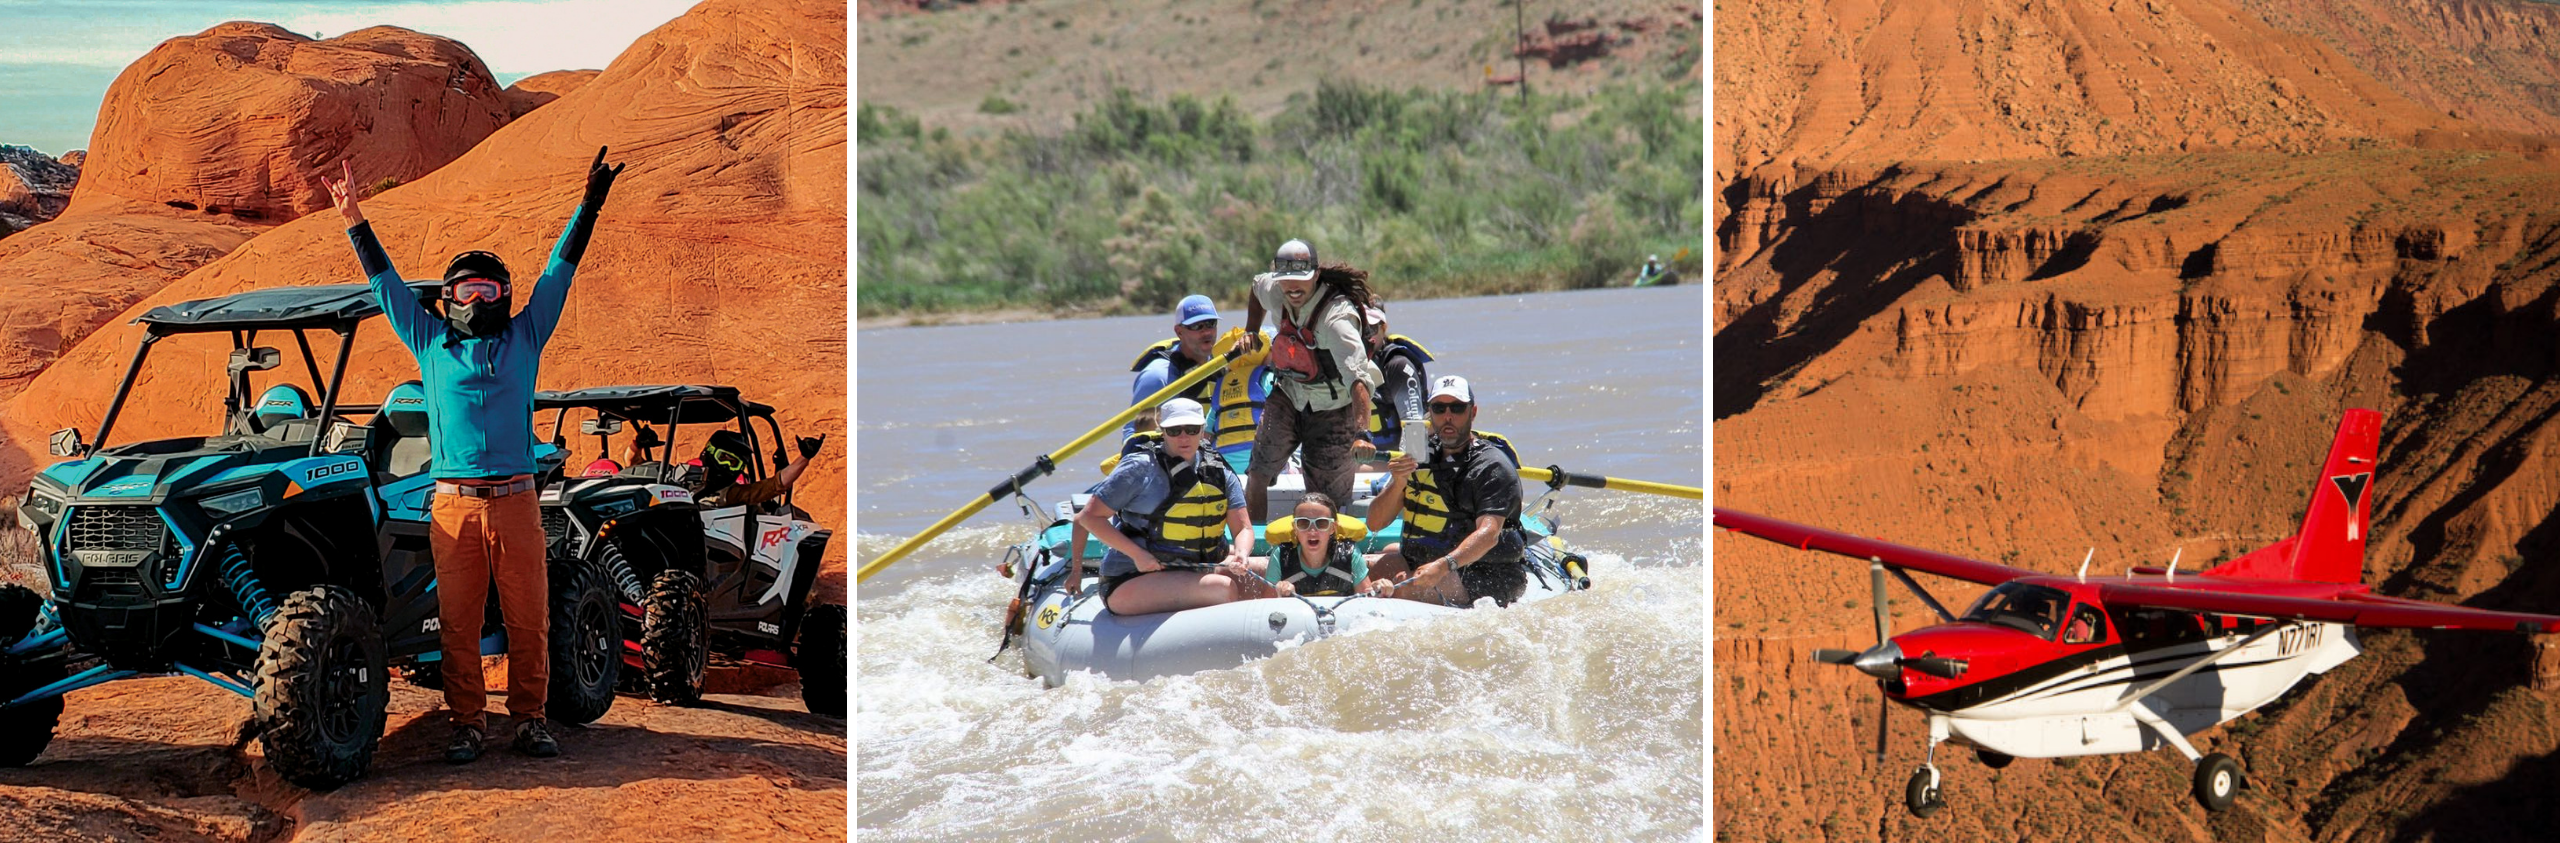 adventures in moab by atv whitewater raft and aircraft